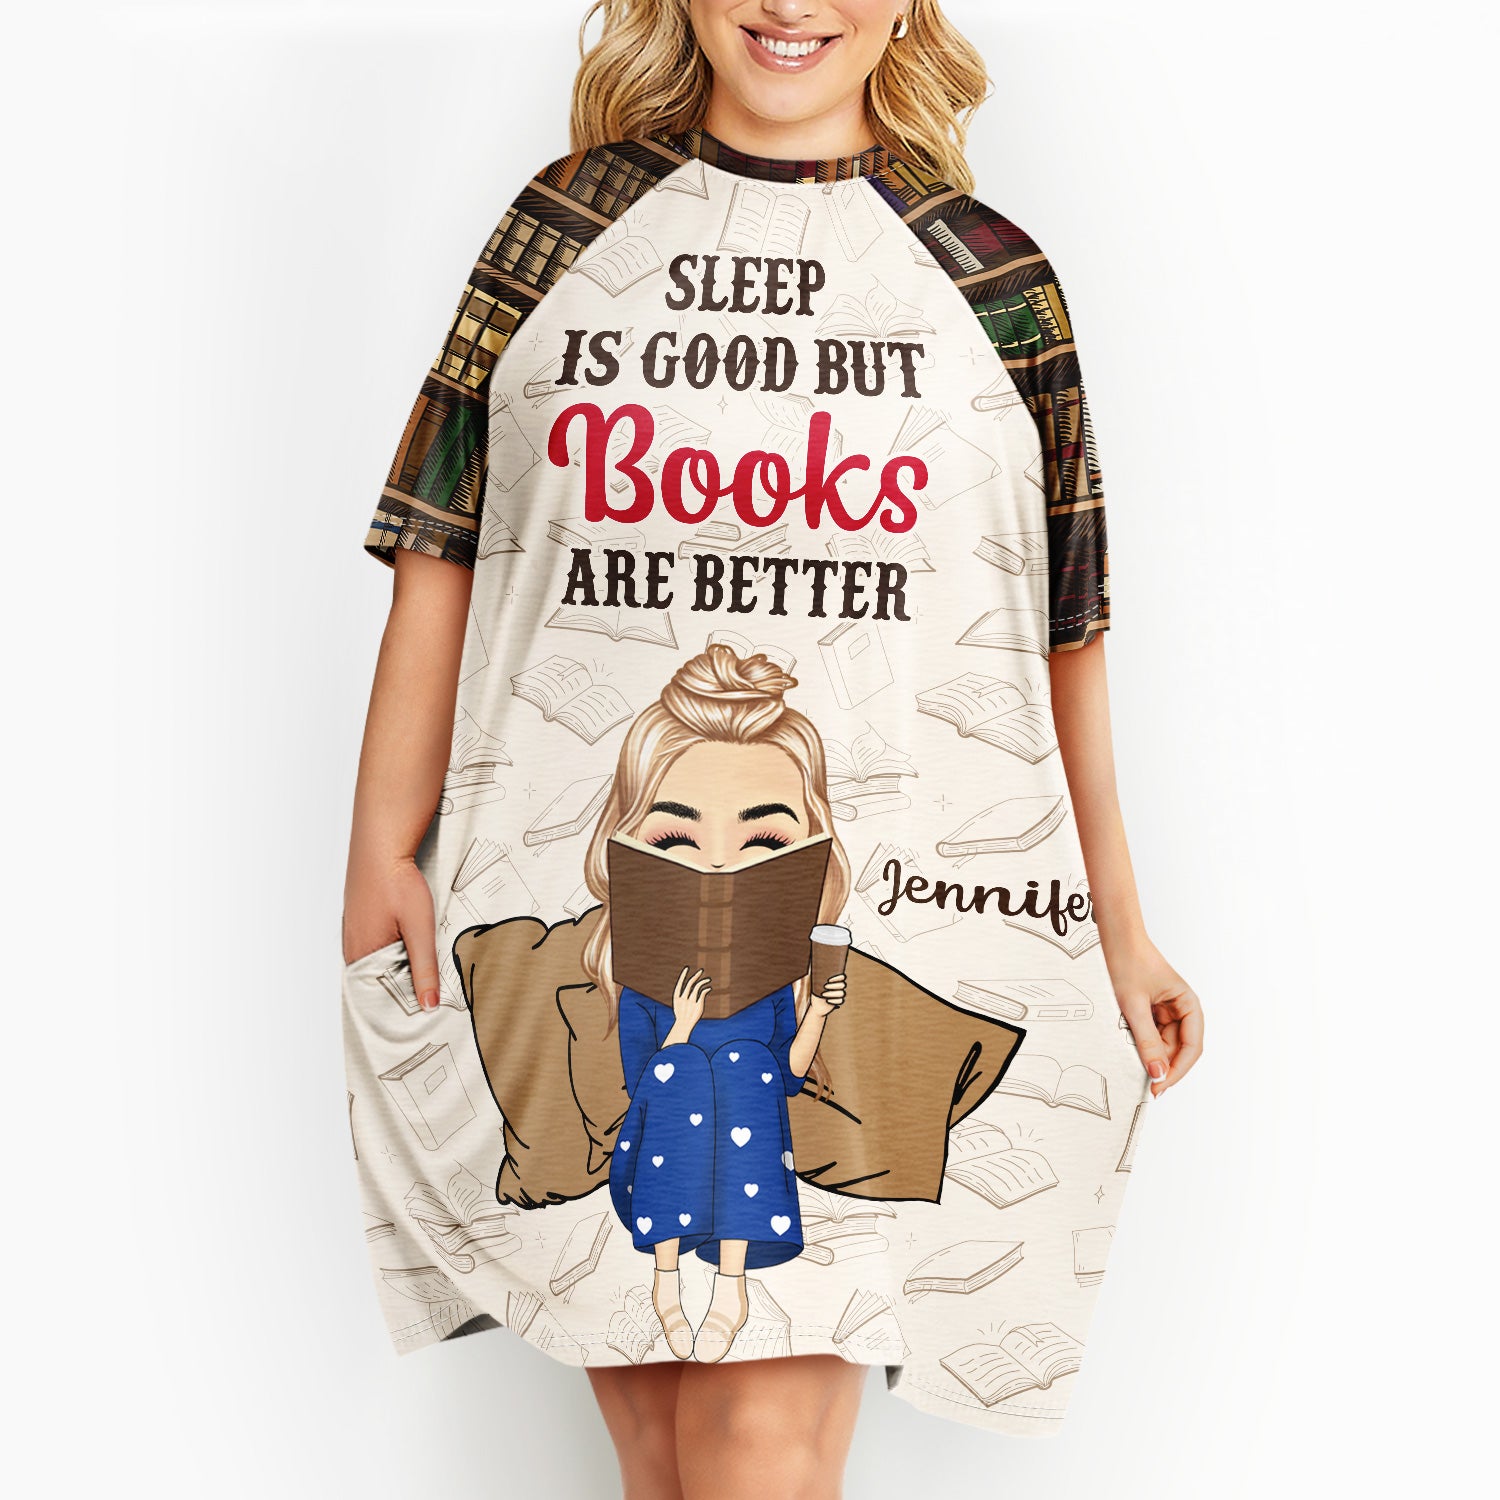 Reading Books Are Better - Gift For Book Lovers, Gift For Women - Personalized Women's Sleep Tee